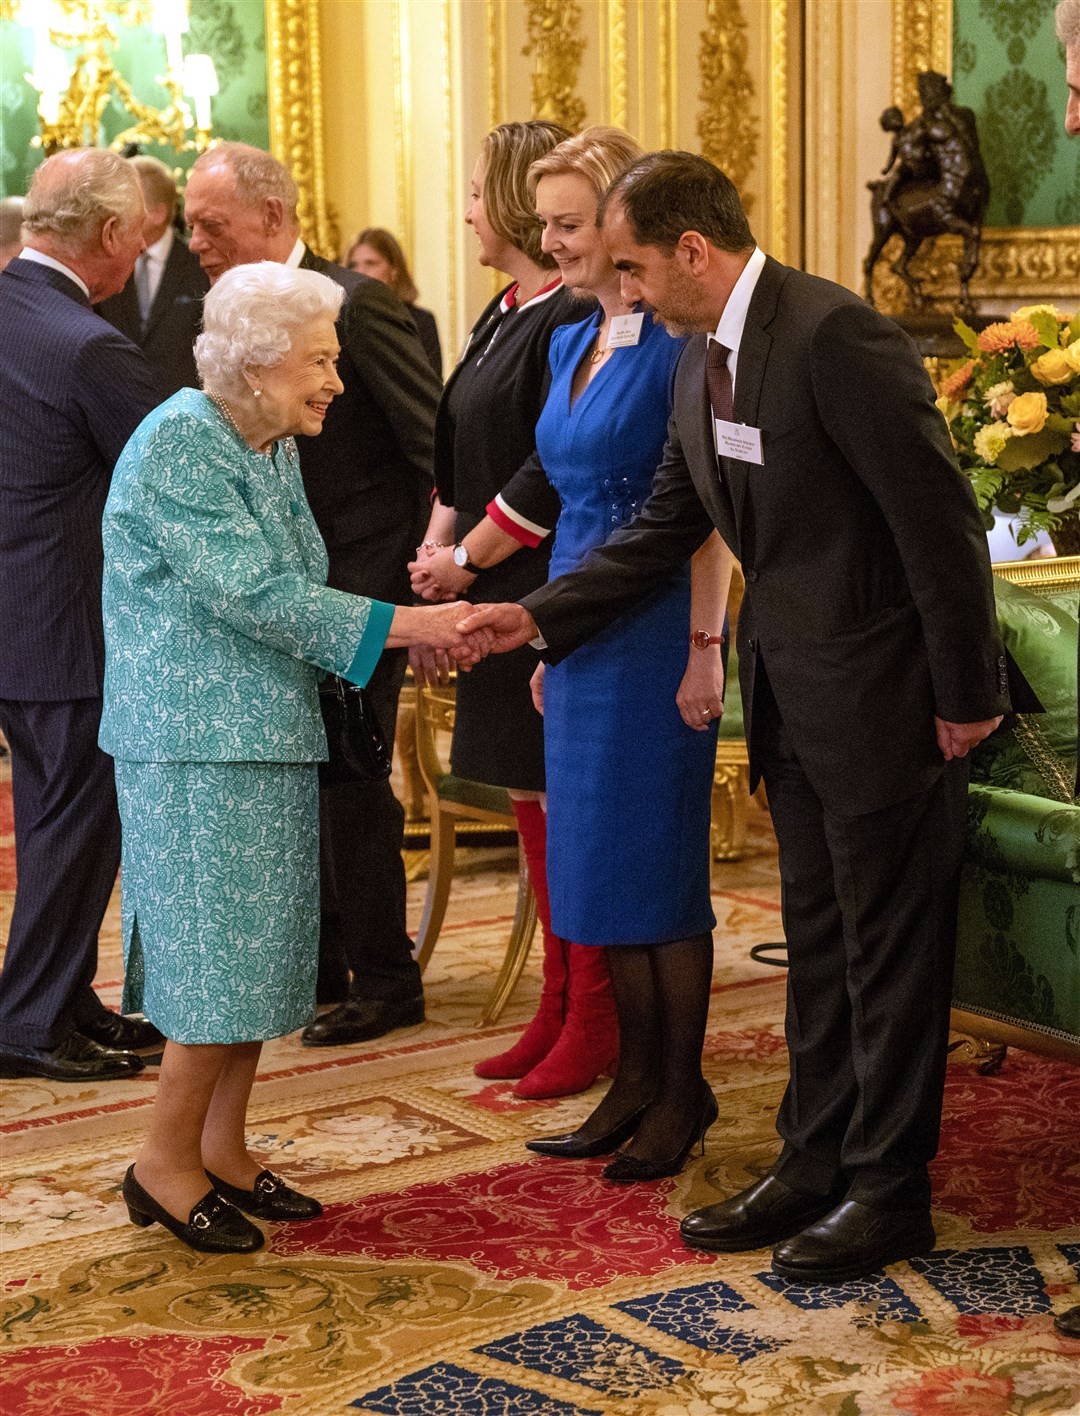 The Queen met Foreign Secretary Liz Truss at Windsor in 2021 (Arthur Edwards/The Sun/PA)